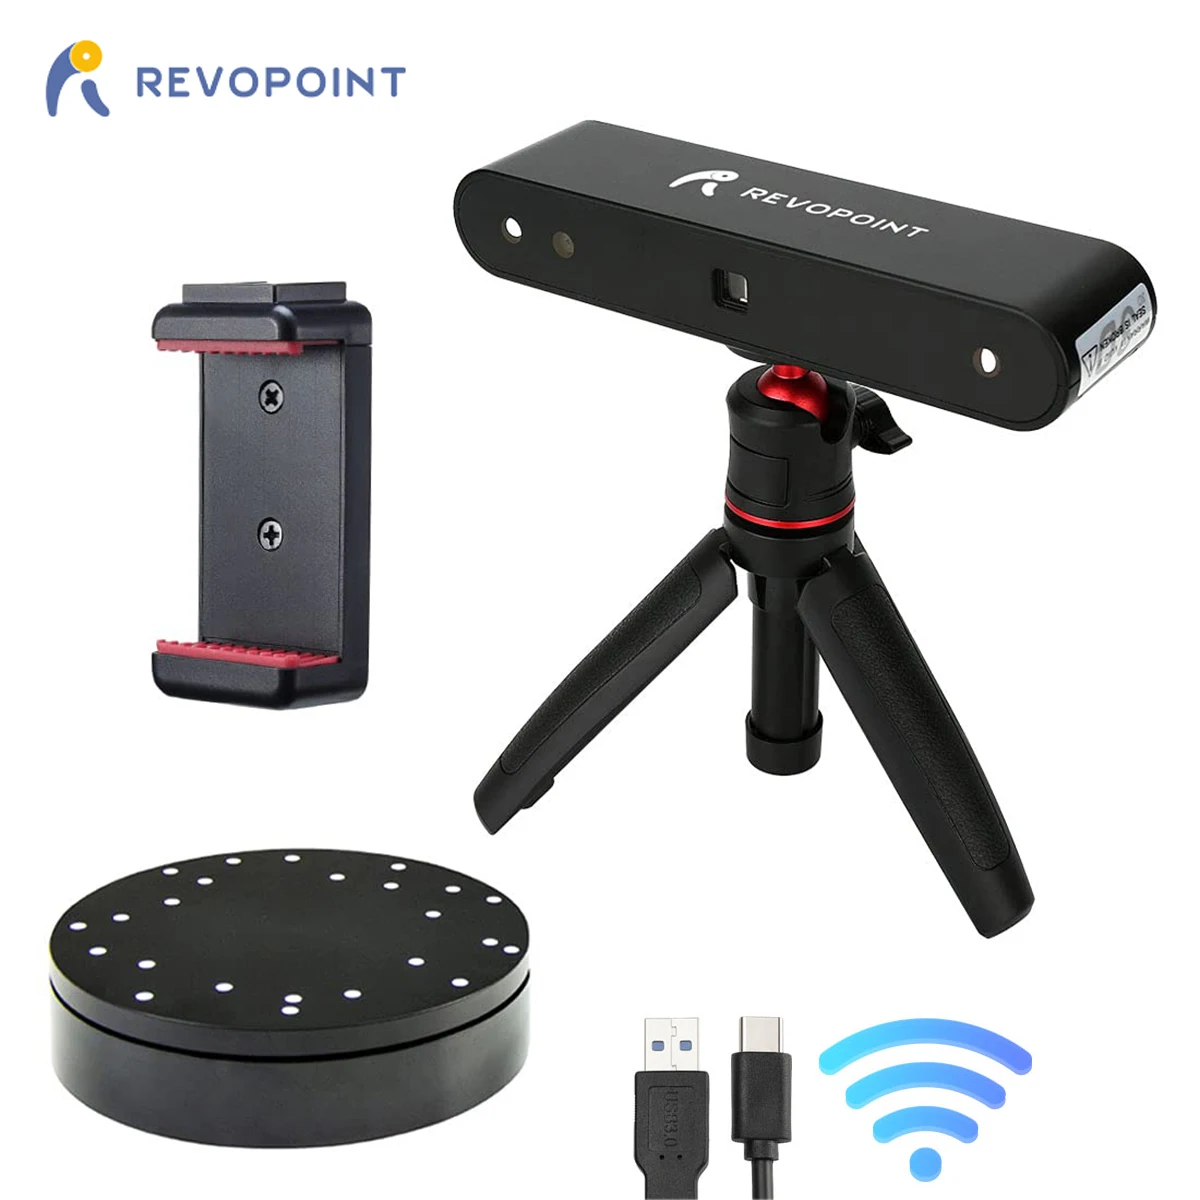 

Revopoint POP 3D Scanner Set with Turntable 0.3mm Accuracy 8 Fps Scan Speed Desktop Handheld Auto Scan Mode for 3D Printing